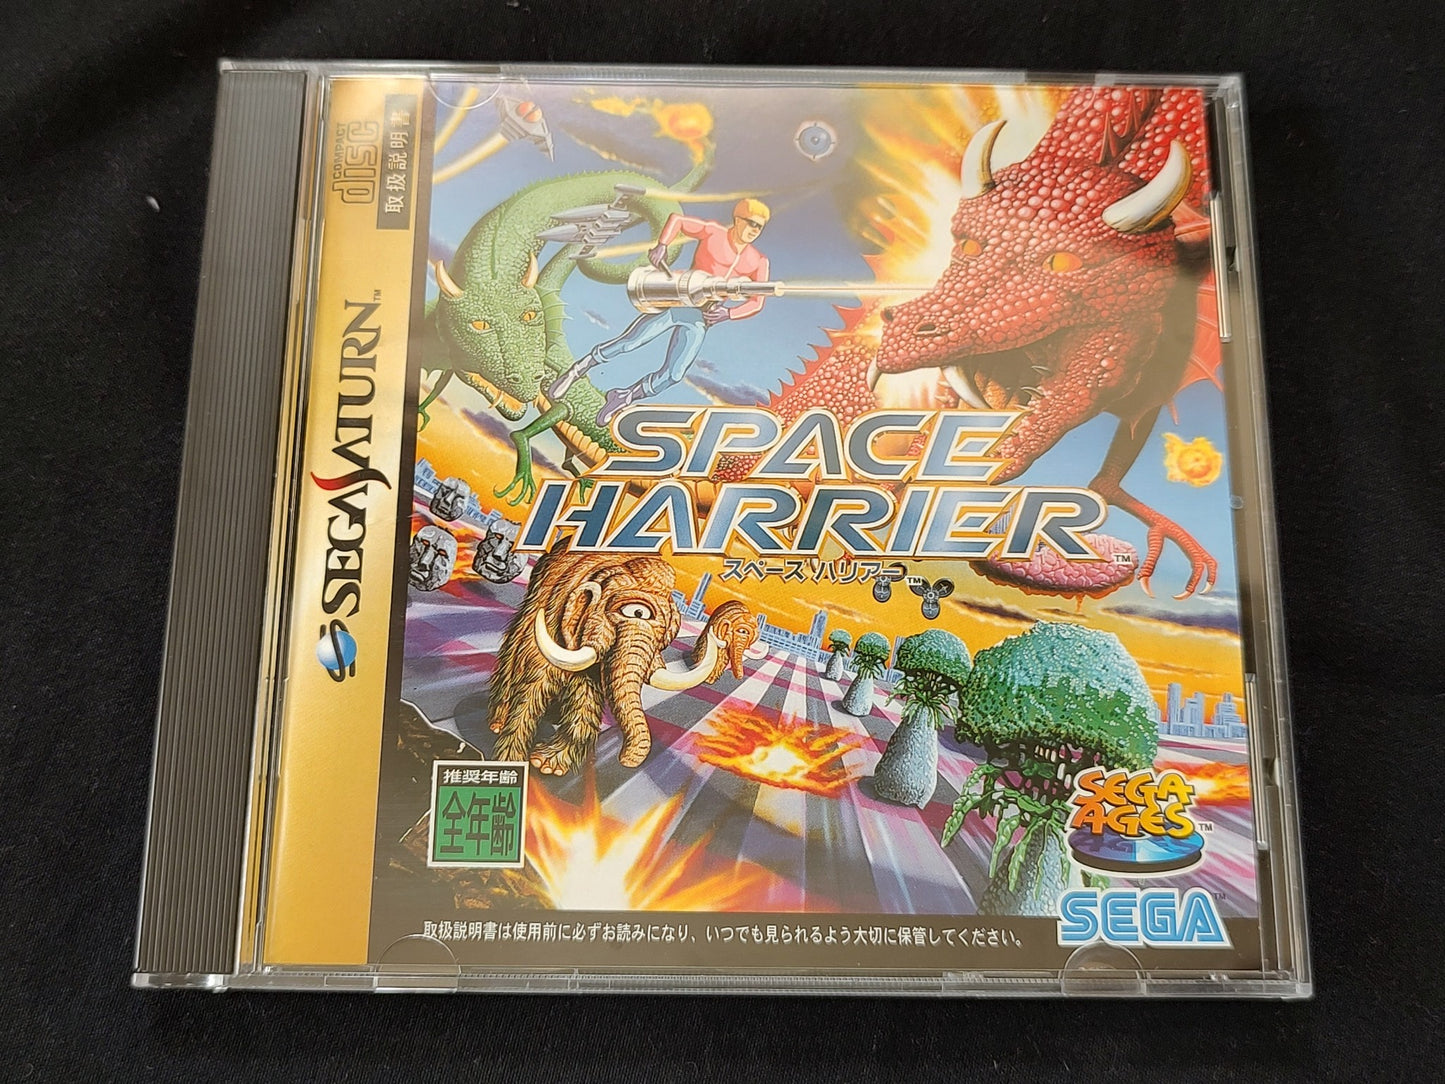 Mission Stick Controller Pad Space Harrier Special Limited Sega Saturn- f0524-